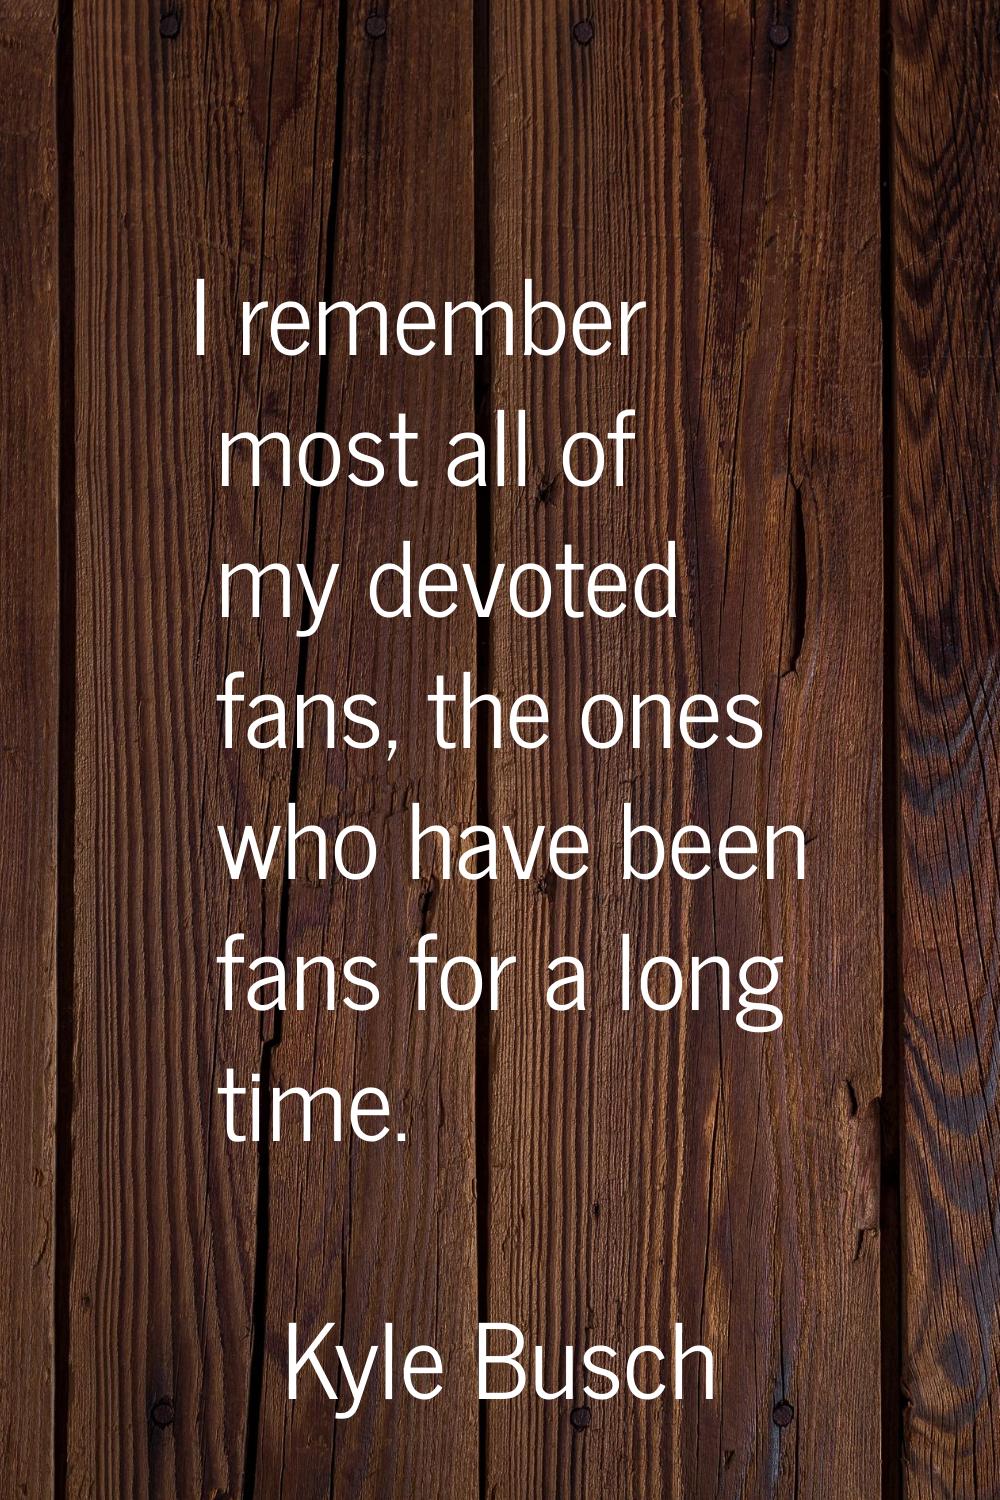 I remember most all of my devoted fans, the ones who have been fans for a long time.